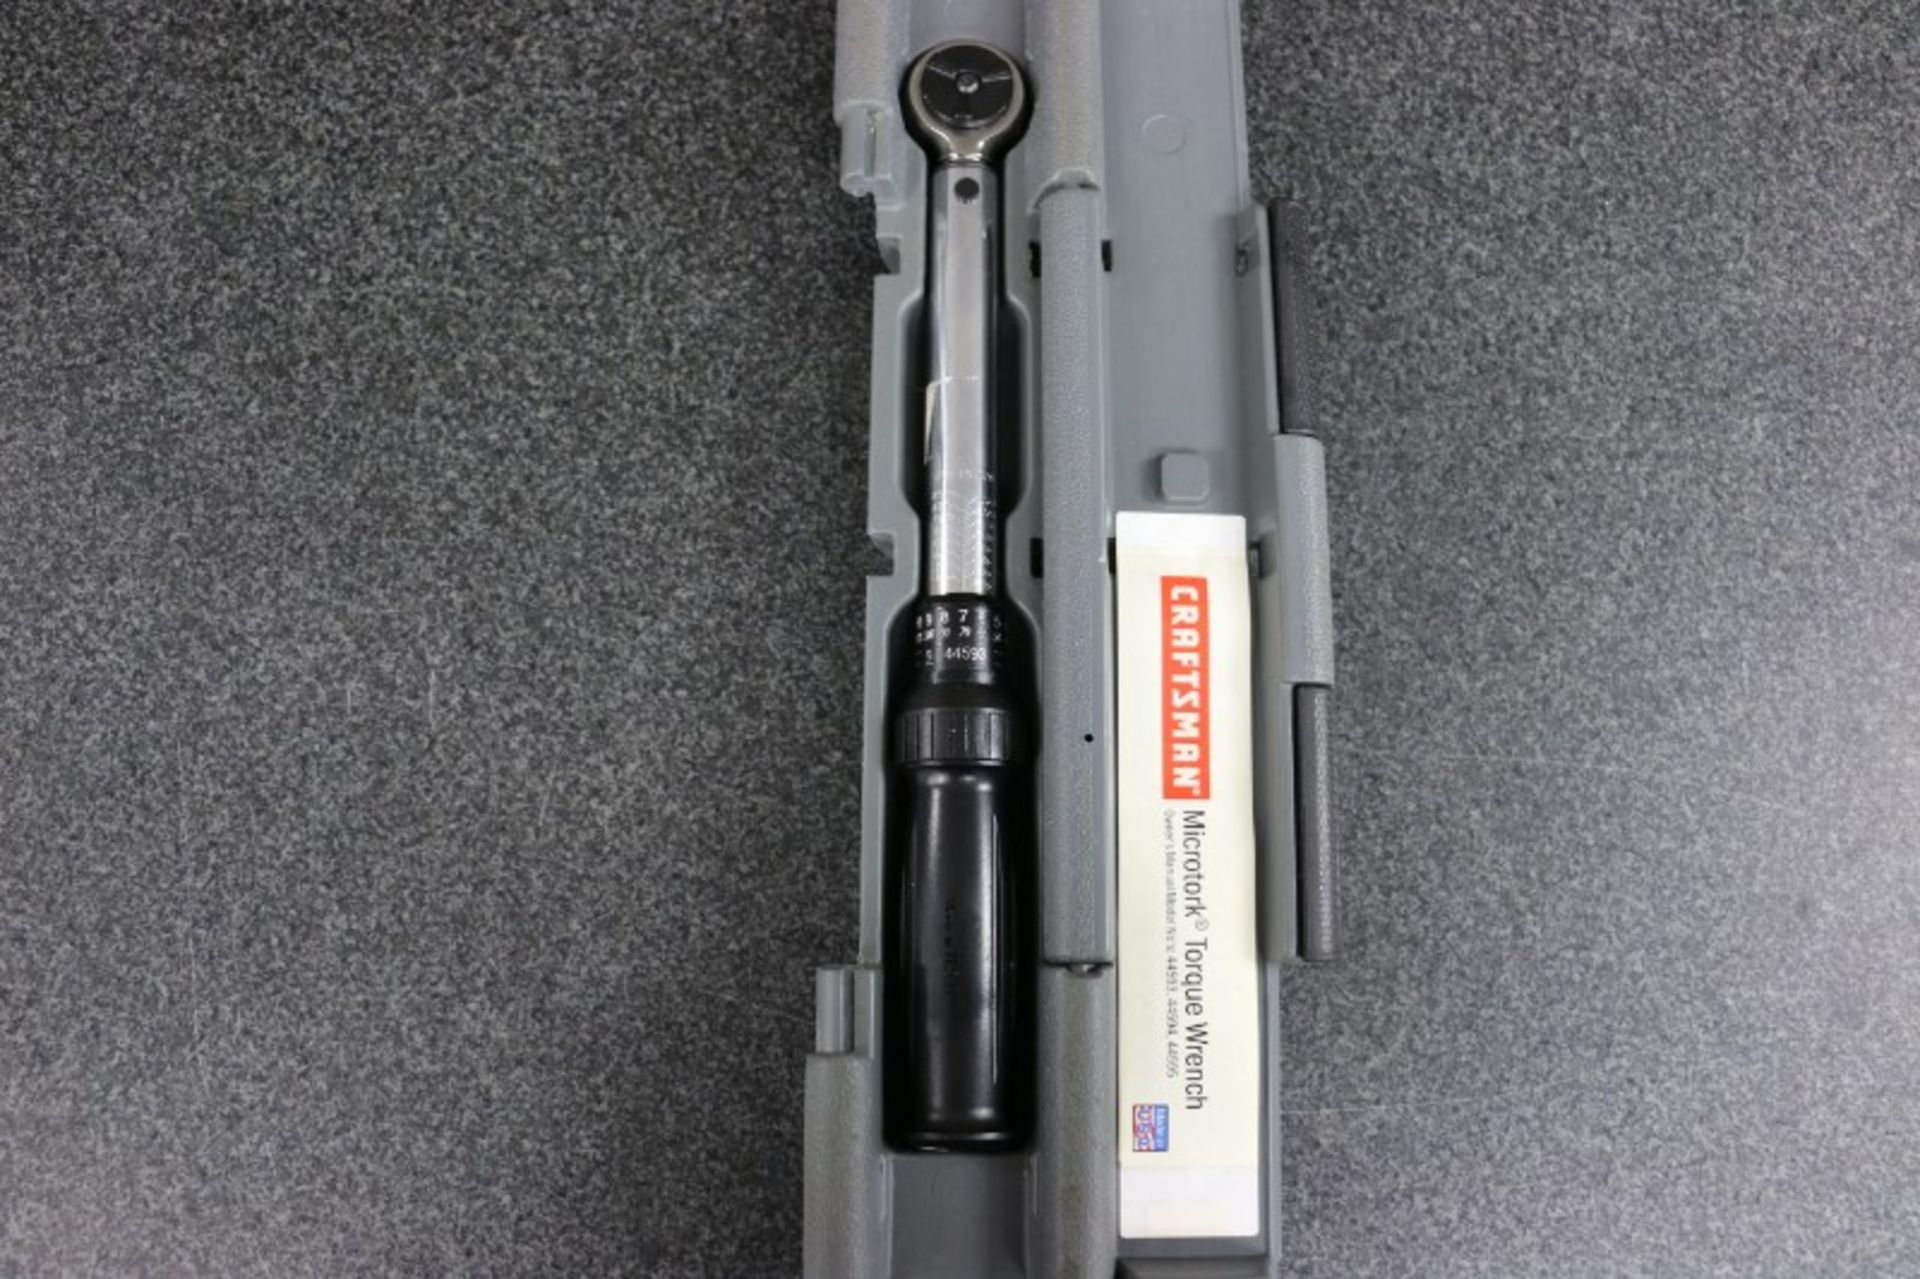 Craftsman Microtork Torque Wrench - Image 2 of 5